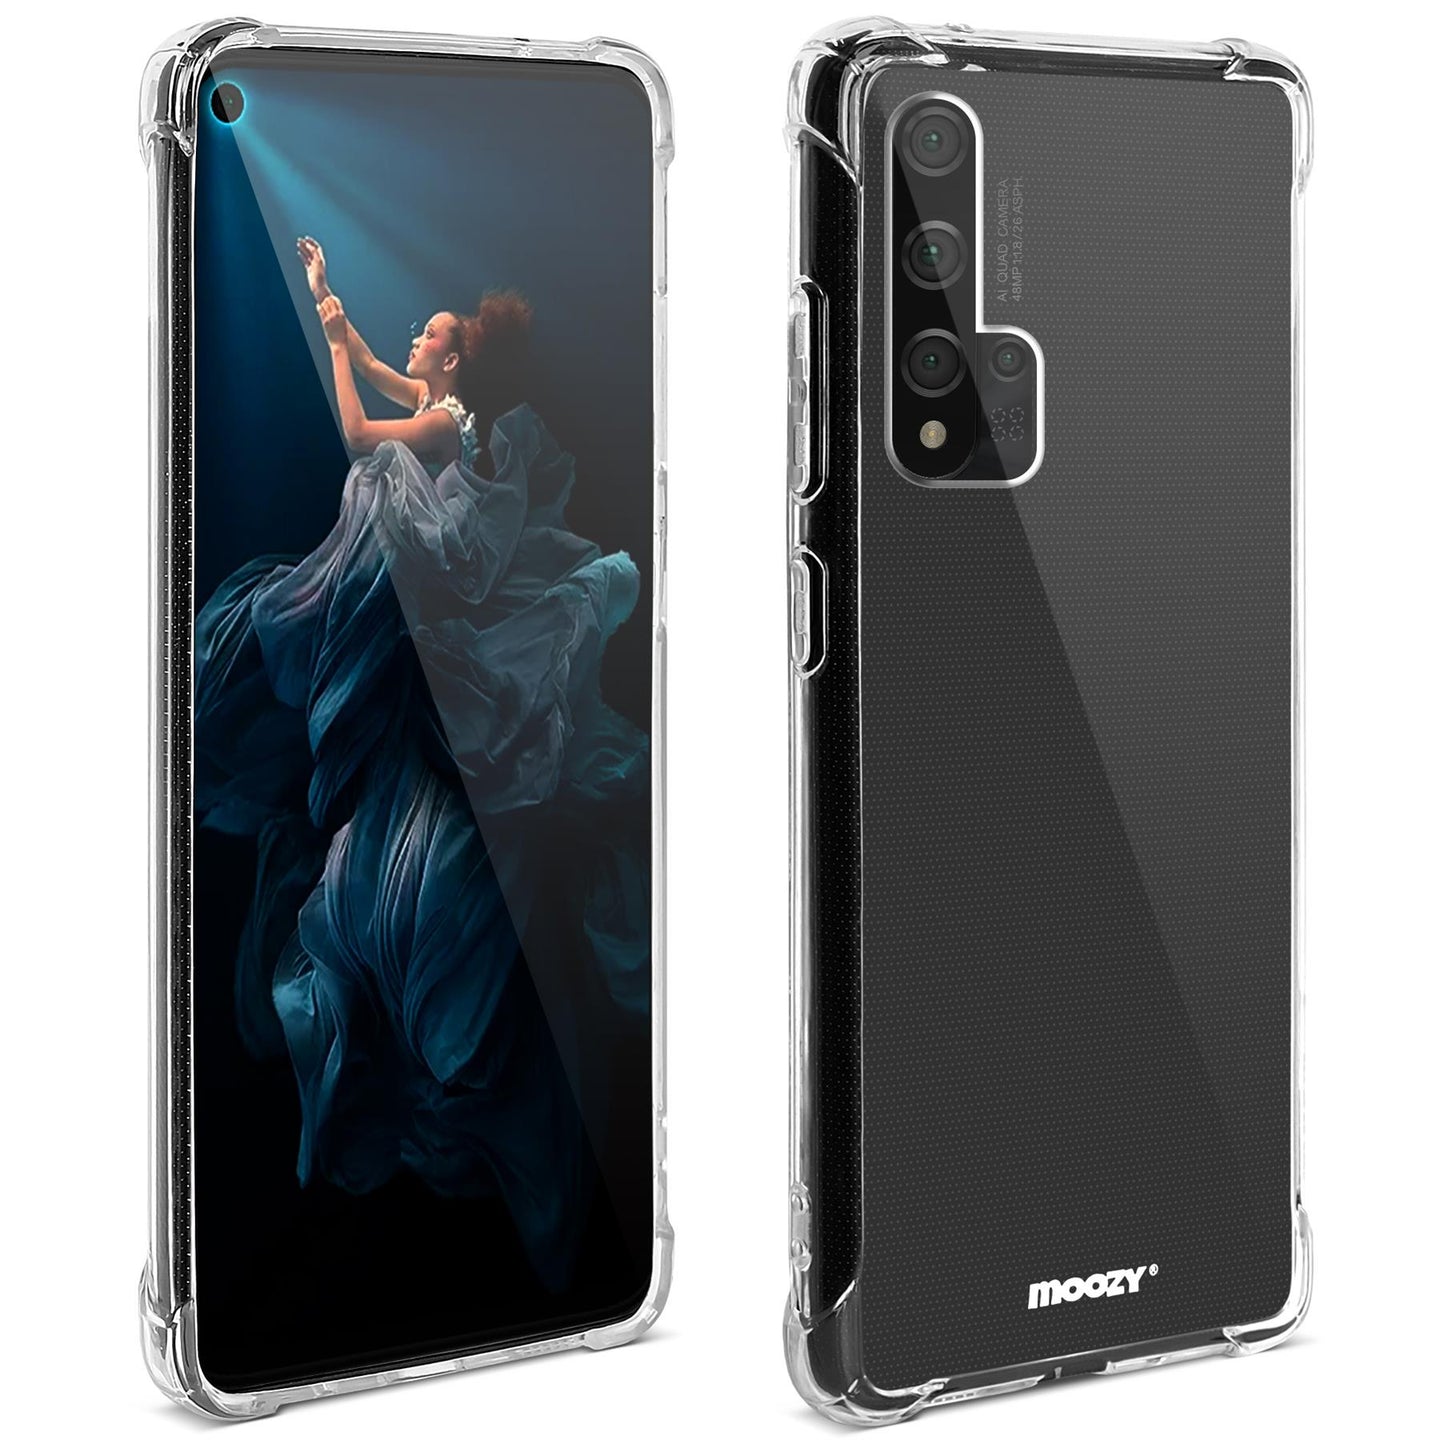 Moozy Shock Proof Silicone Case for Huawei Nova 5T and Honor 20 - Transparent Crystal Clear Phone Case Soft TPU Cover